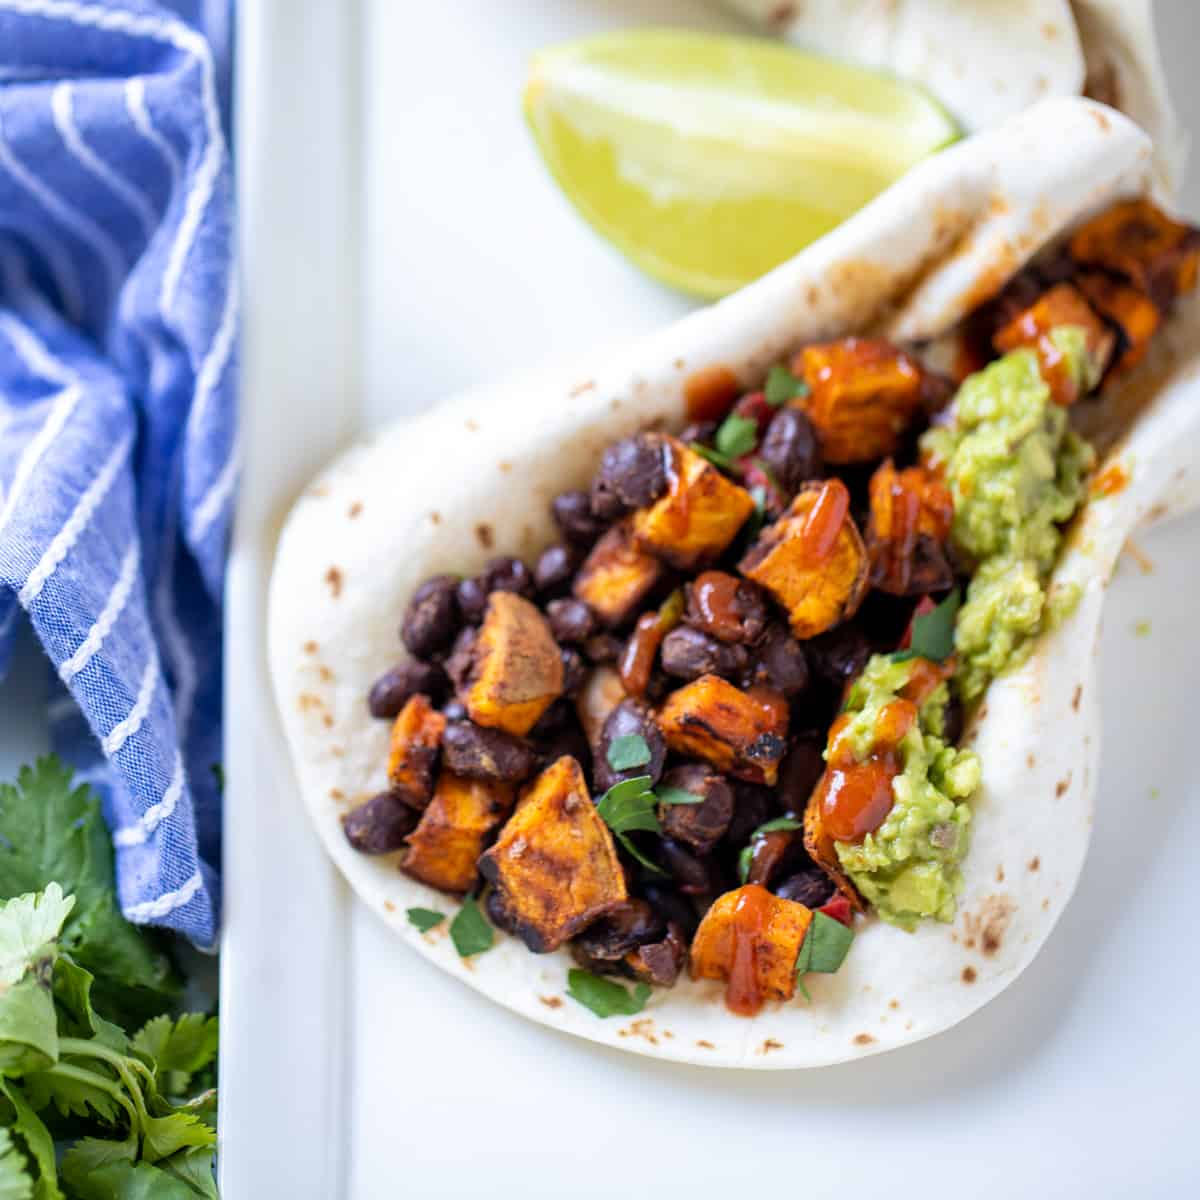 flour tortilla filled with sweet potatoes, black beans, and guacamole.